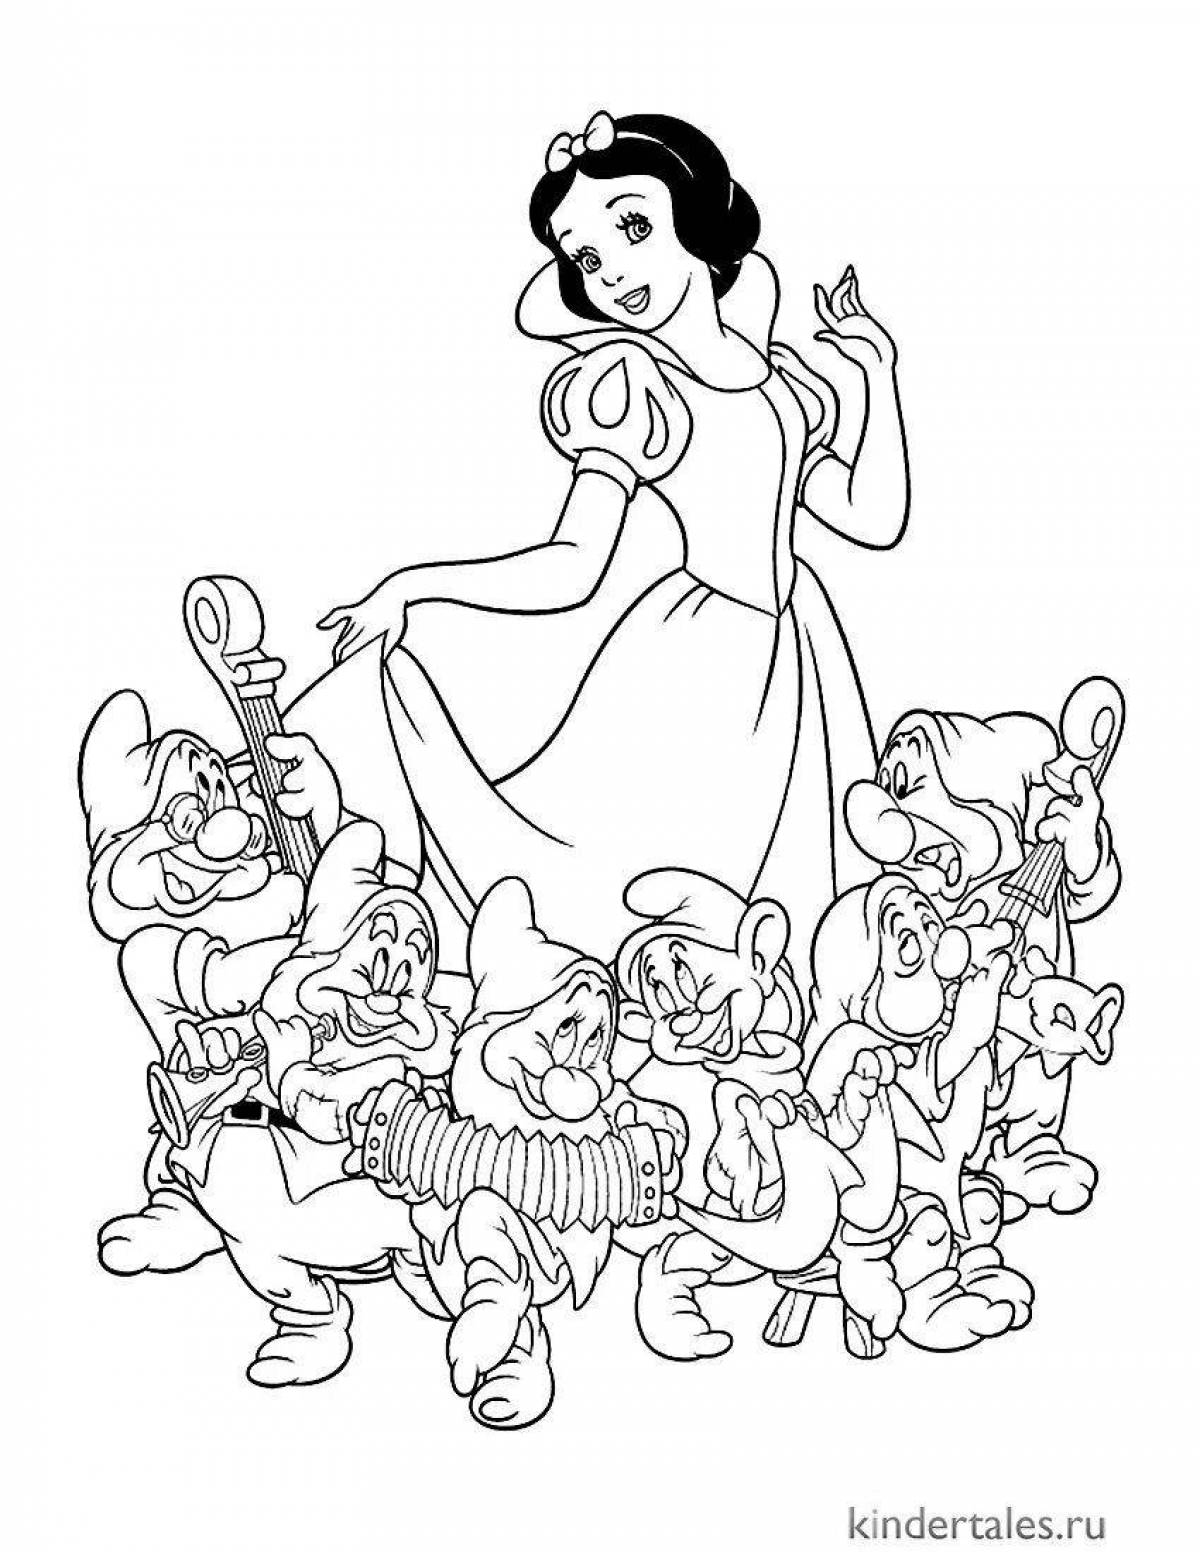 Cute snow white coloring book for girls